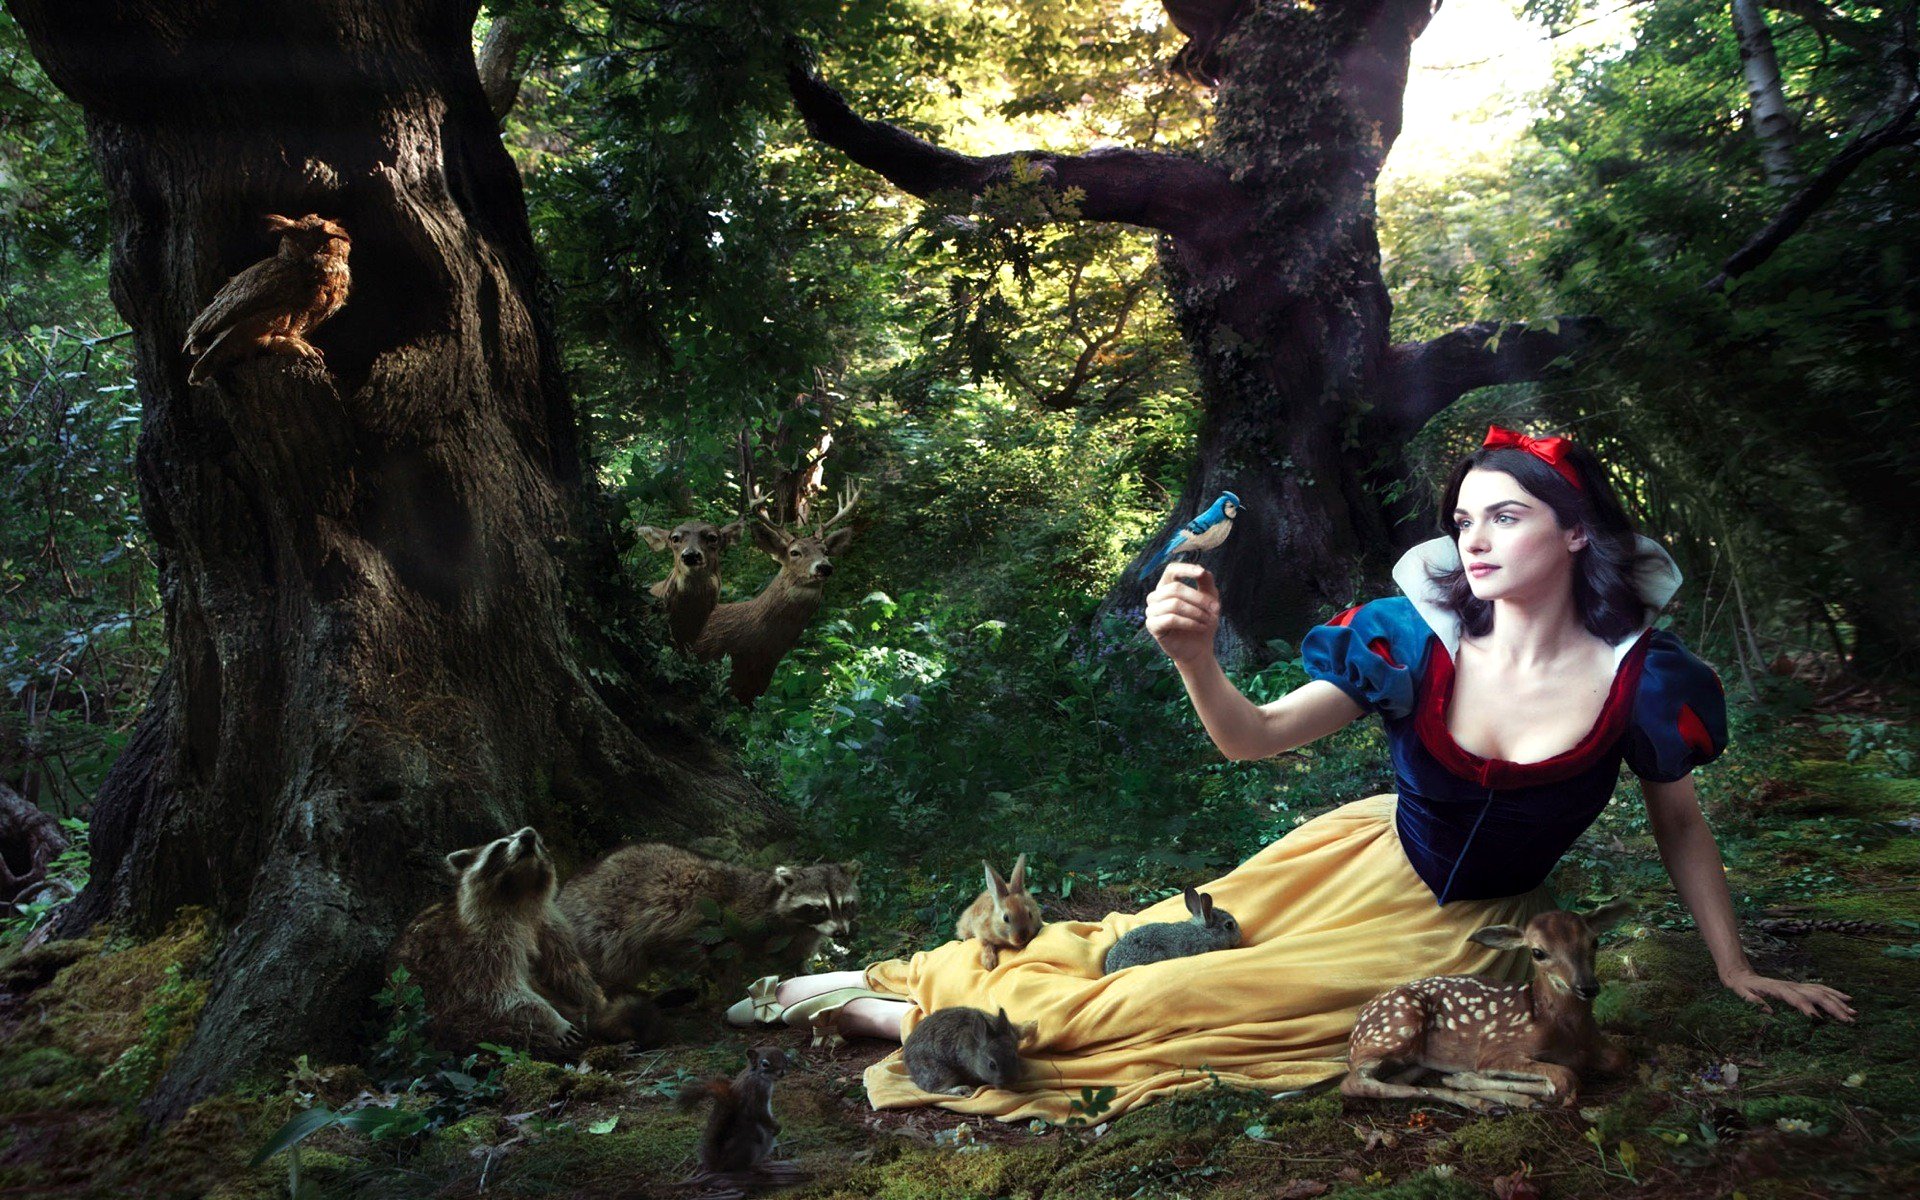 Snow White Wallpaper Google image from onlyhdwallpapers.com